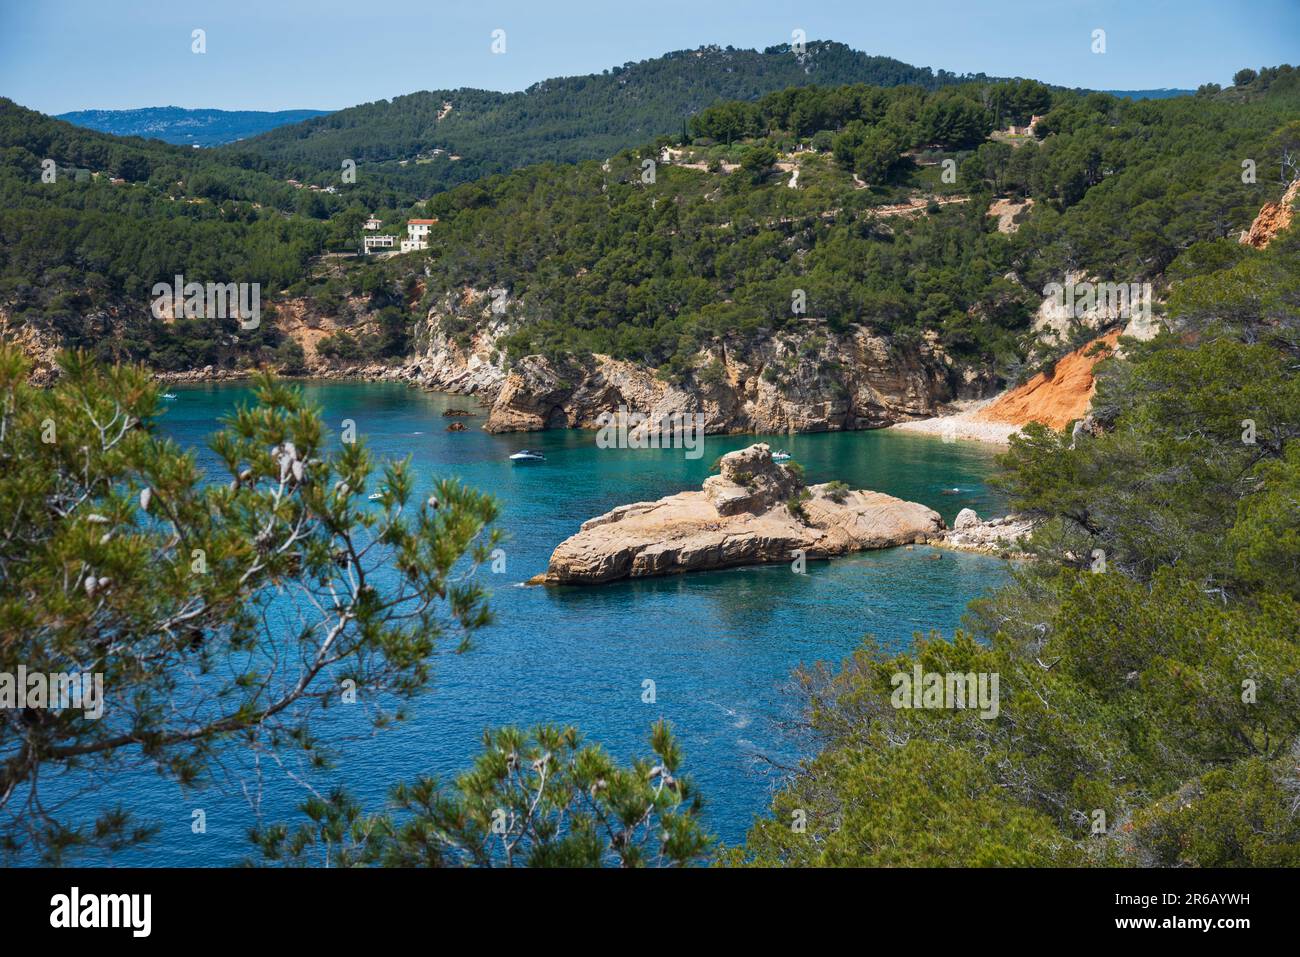 Galley rock or Submarine rock. View  from hiking path near Calanque de Port d'Alon (between Saint-Cyr-sur-Mer and Bandol), France. Spectacular seaside Stock Photo